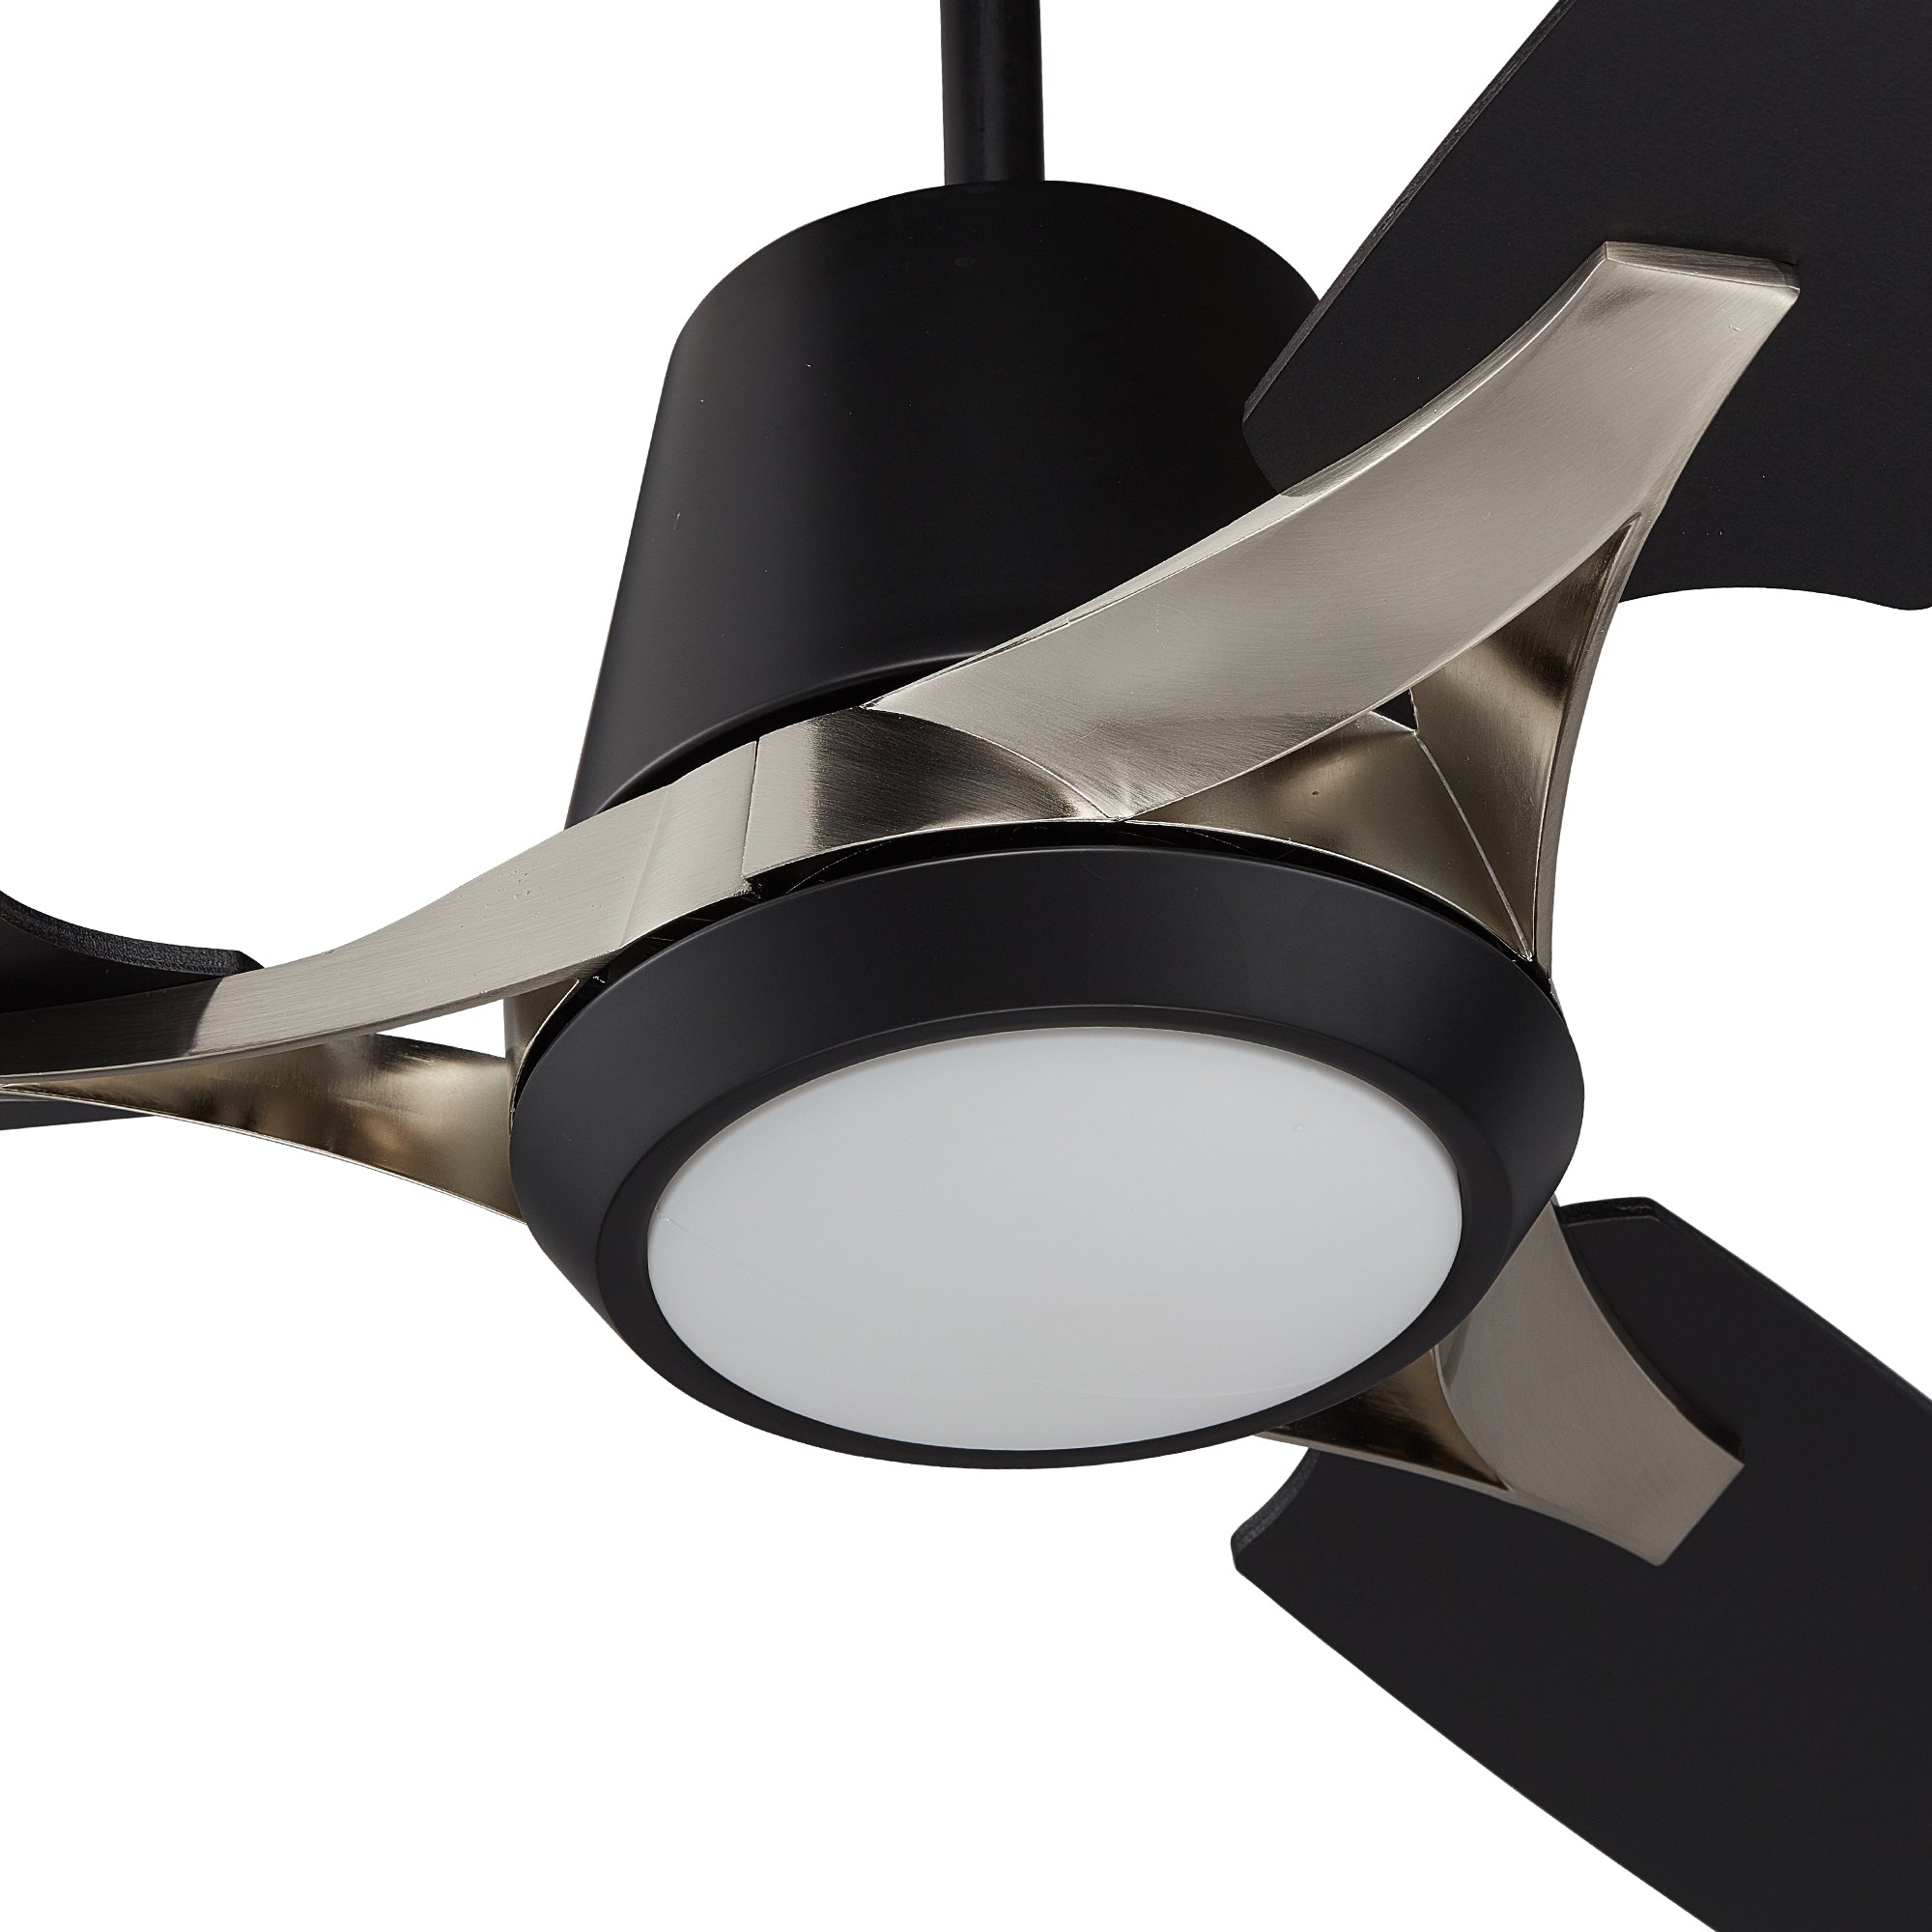 The Smafan Exton 52&#39;&#39; Smart Ceiling Fan keeps your space cool, bright, and stylish. It is a soft modern masterpiece perfect for your large indoor living spaces. This Wifi smart ceiling fan is a simplicity designing with elegant Plywood blades and compatible with LED Light. The fan features wall control, Wi-Fi apps, Siri Shortcut and Voice control technology (compatible with Amazon Alexa and Google Home Assistant to set fan preferences.